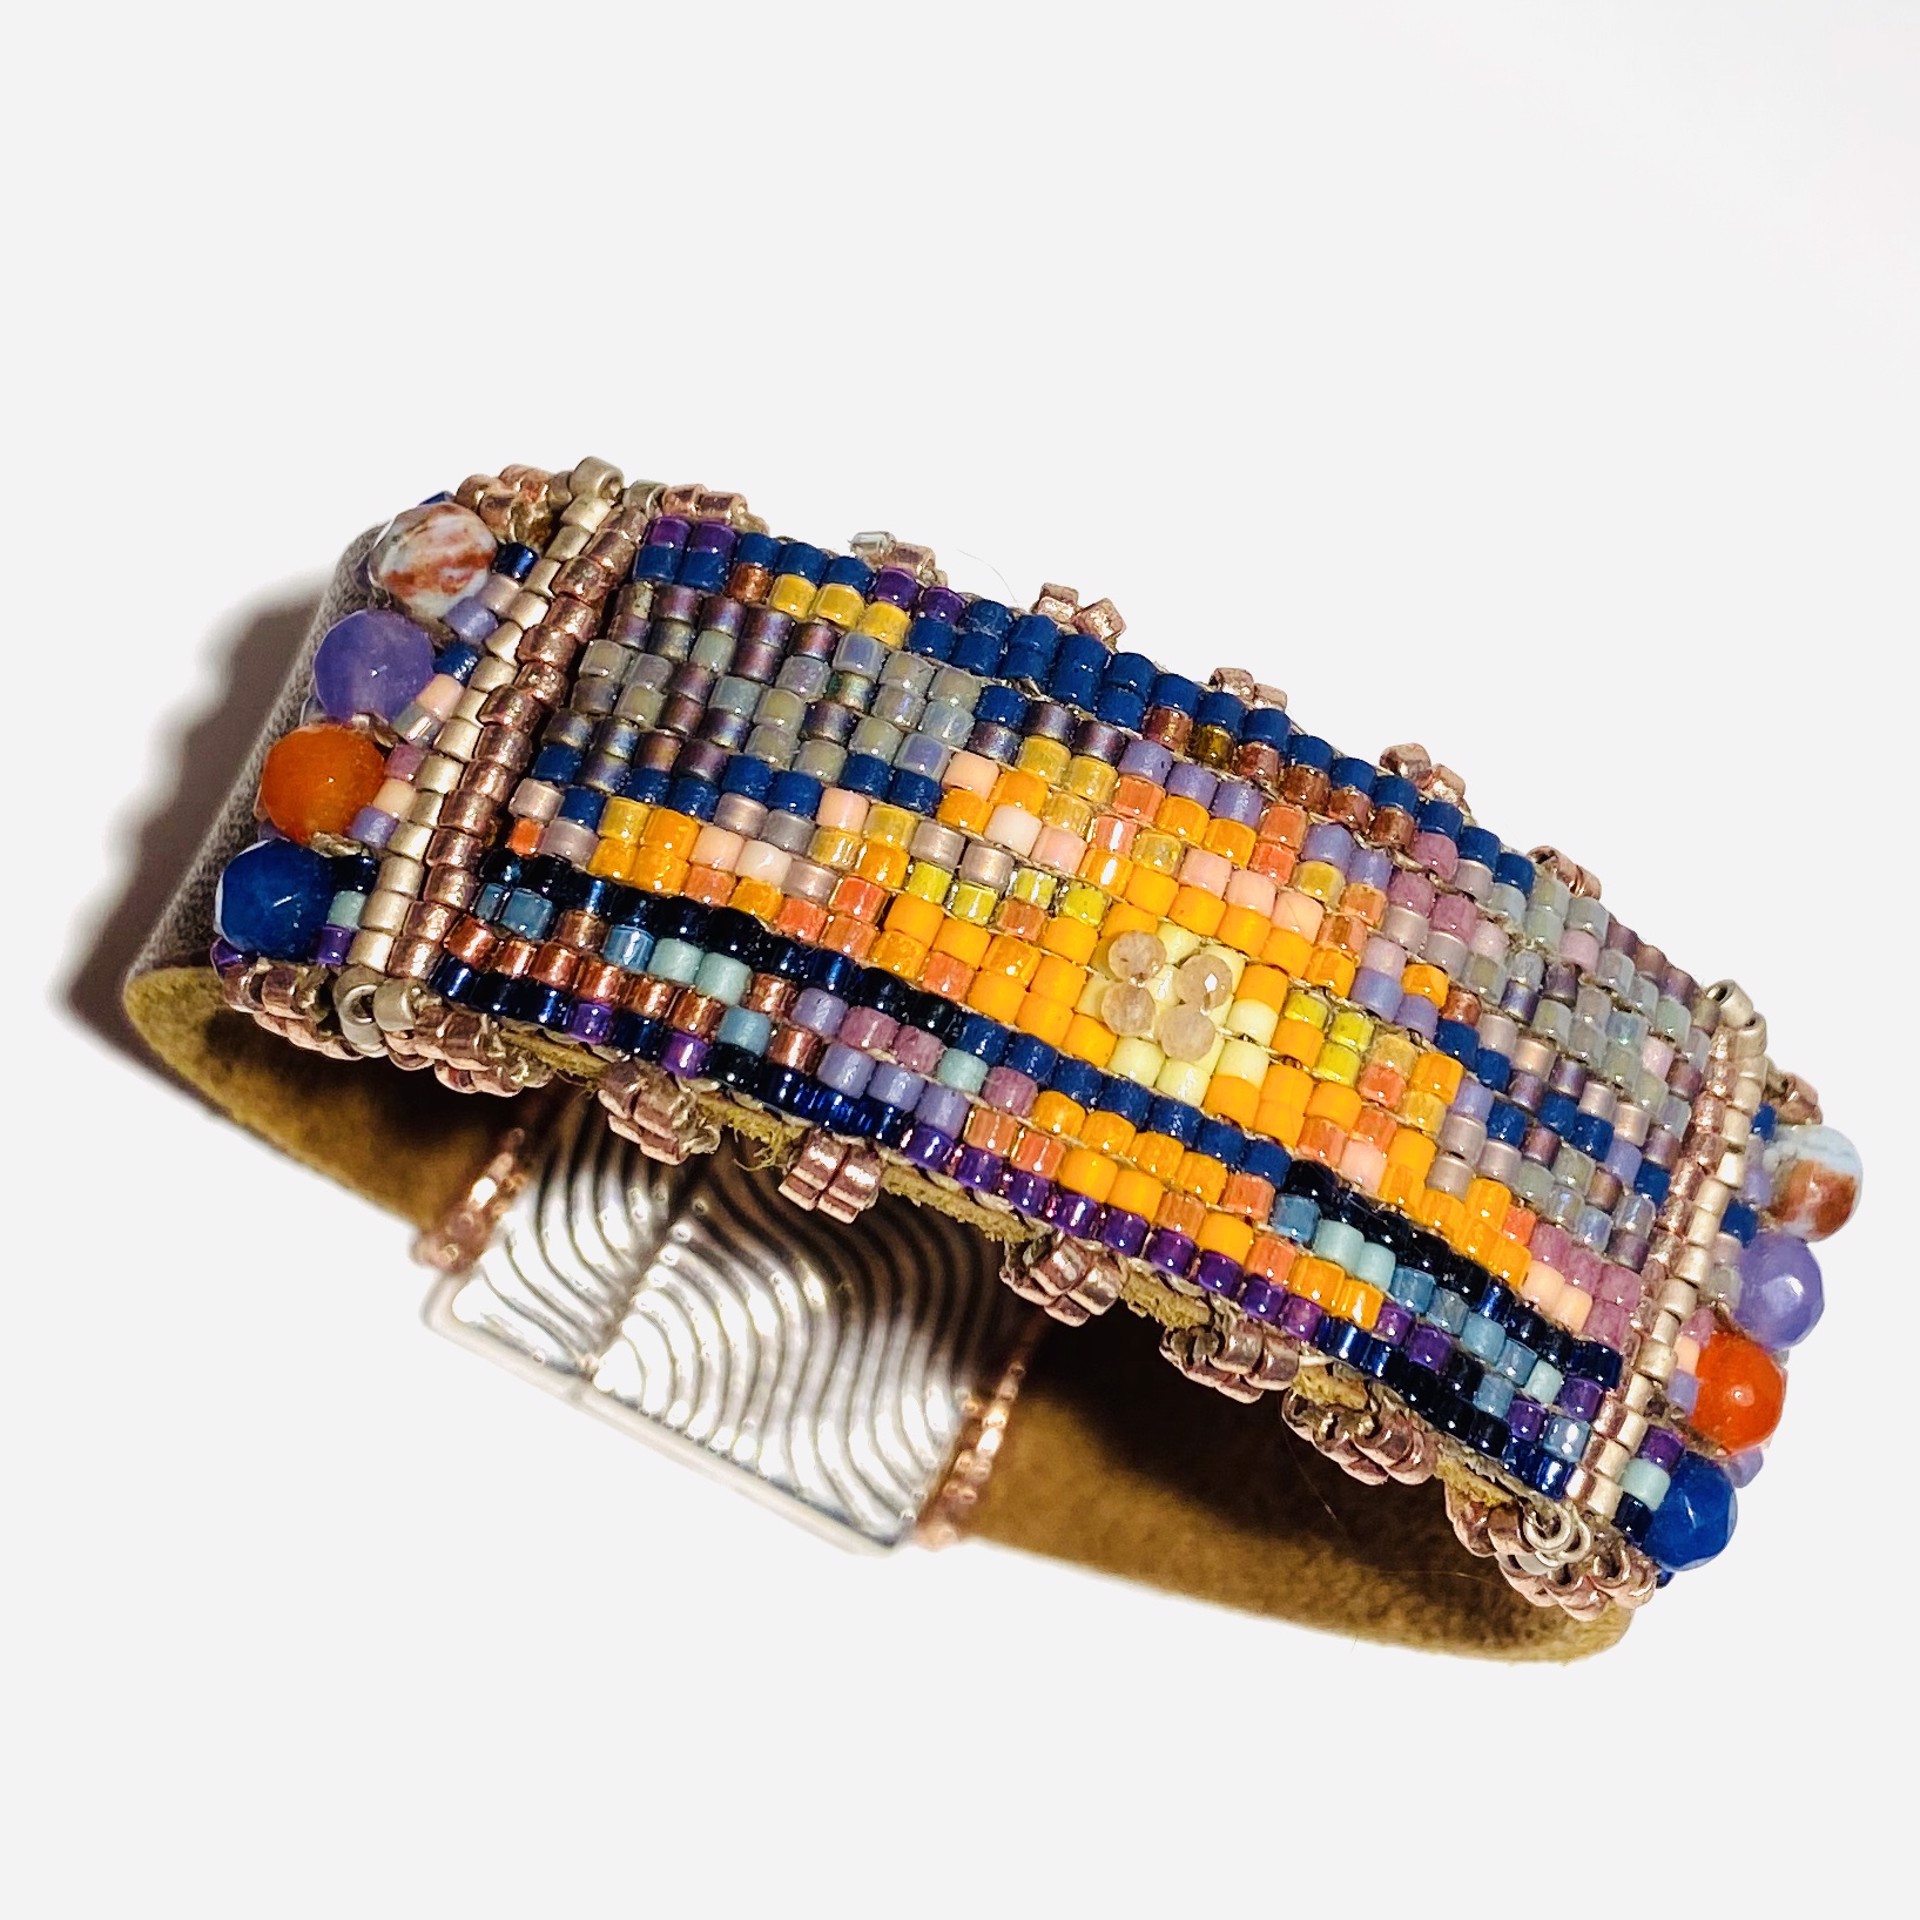 "The End Of The Day" Bracelet by Barbara Duimstra